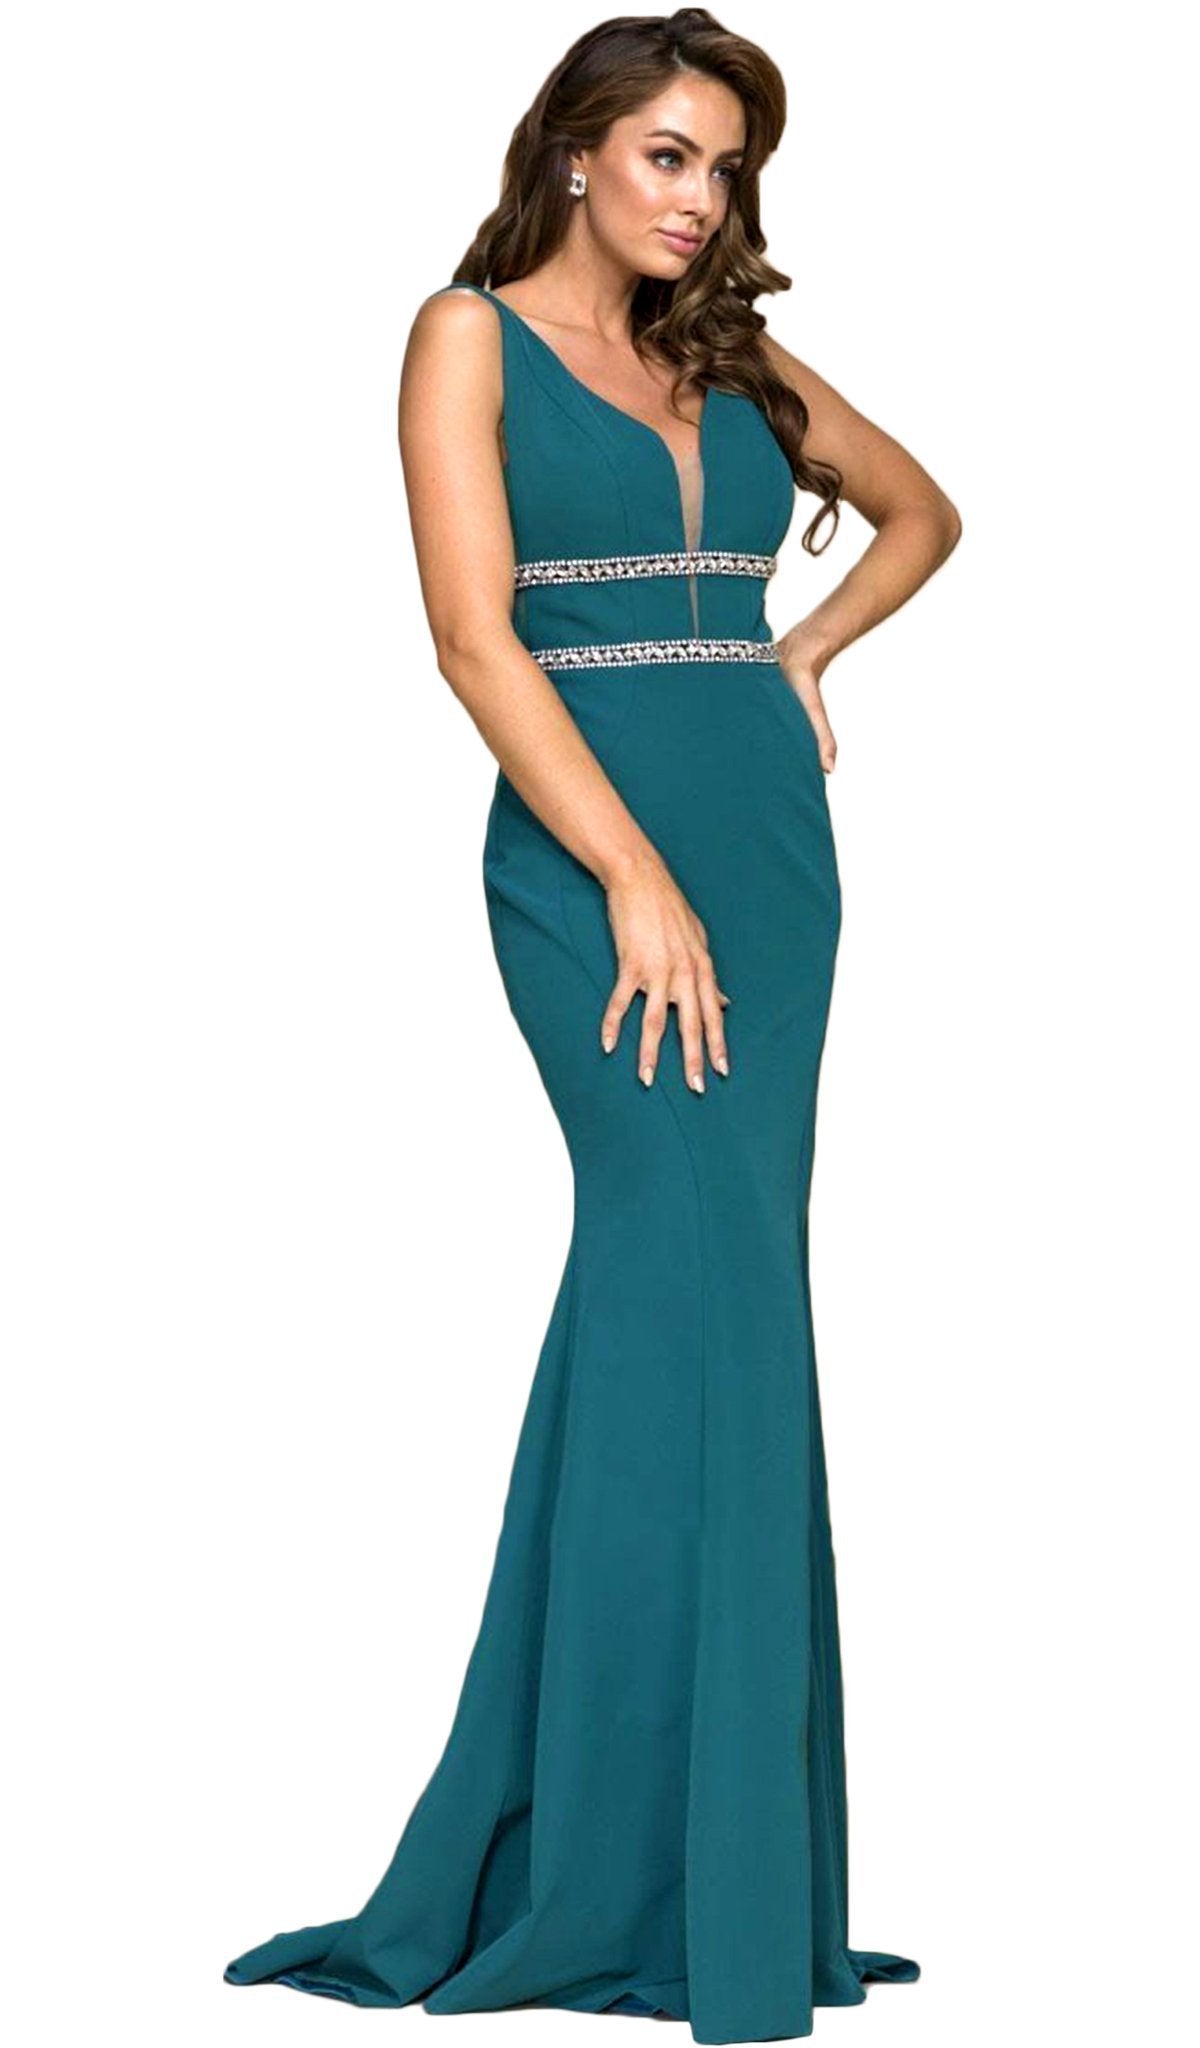 Nox Anabel - A076 Sleeveless Jewel-Banded V-Neck Mermaid Gown Special Occasion Dress XS / Green